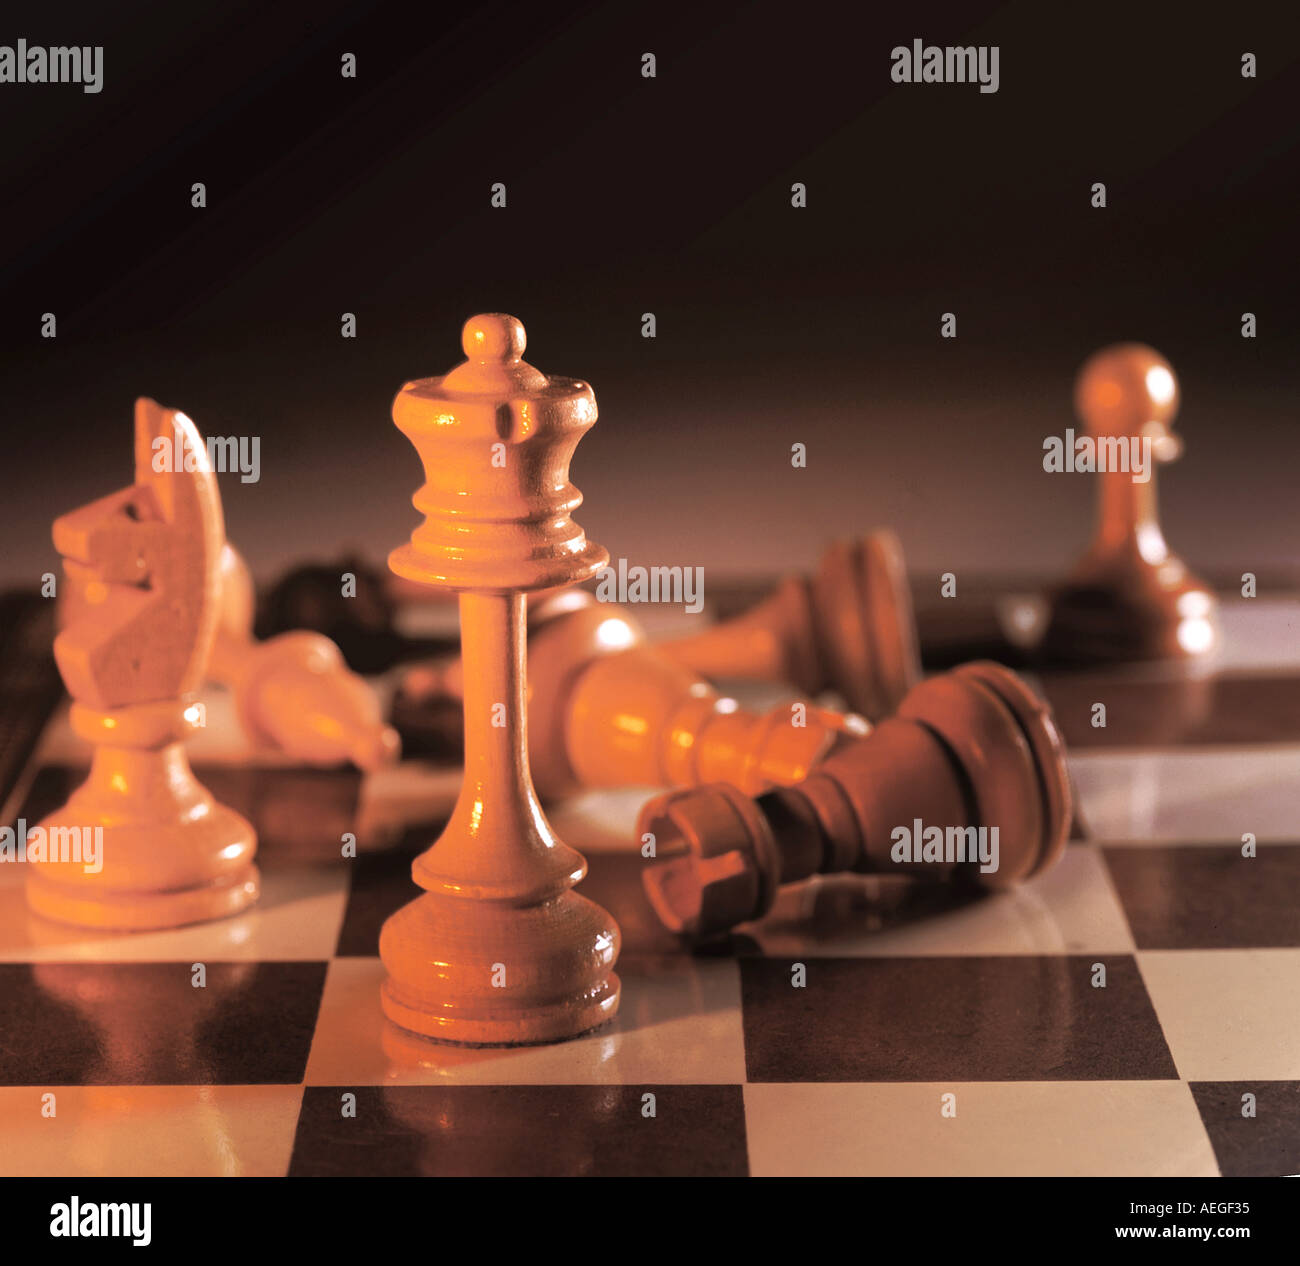 Office chess chessboard playing pieces wooden queen knight tower pawn leisure game miscellaneous background texture Stock Photo